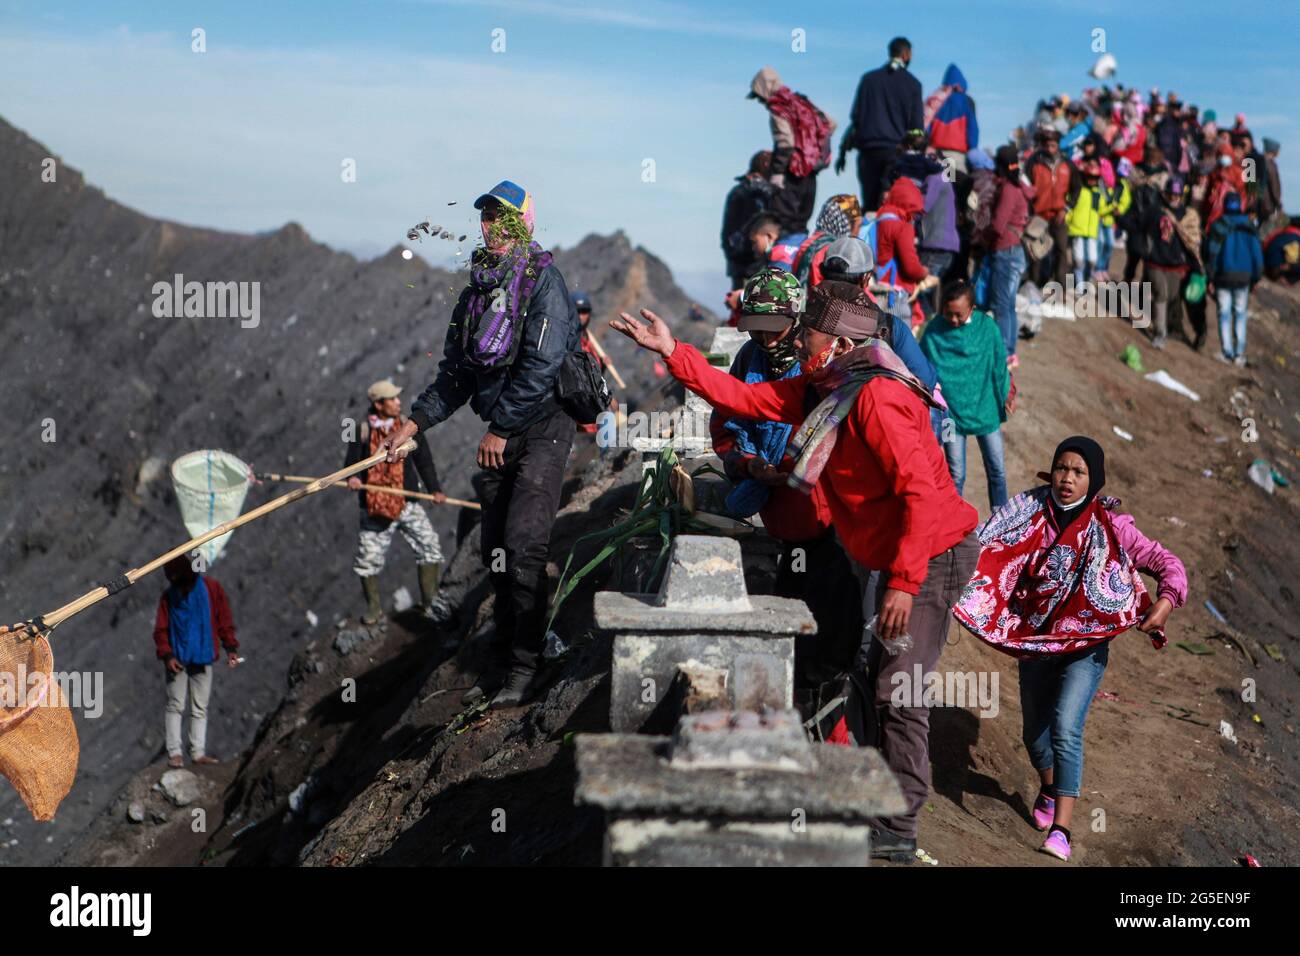 Tenggerese worshippers throw money and vegetable as offerings during the Yadnya Kasada Festival at crater of Mount Bromo amid the coronavirus pandemic. Tenggerese people are a Javanese ethnic group in Eastern Java who claimed to be the descendants of the Majapahit princess. Their population of roughly 500,000 is centered in the Bromo Tengger Semeru National Park in eastern Java. The most popular ceremony is the Kasada festival, which makes it the most visited tourist attraction in Indonesia. The festival is the main festival of the Tenggerese people and lasts about a month. On the fourteenth Stock Photo